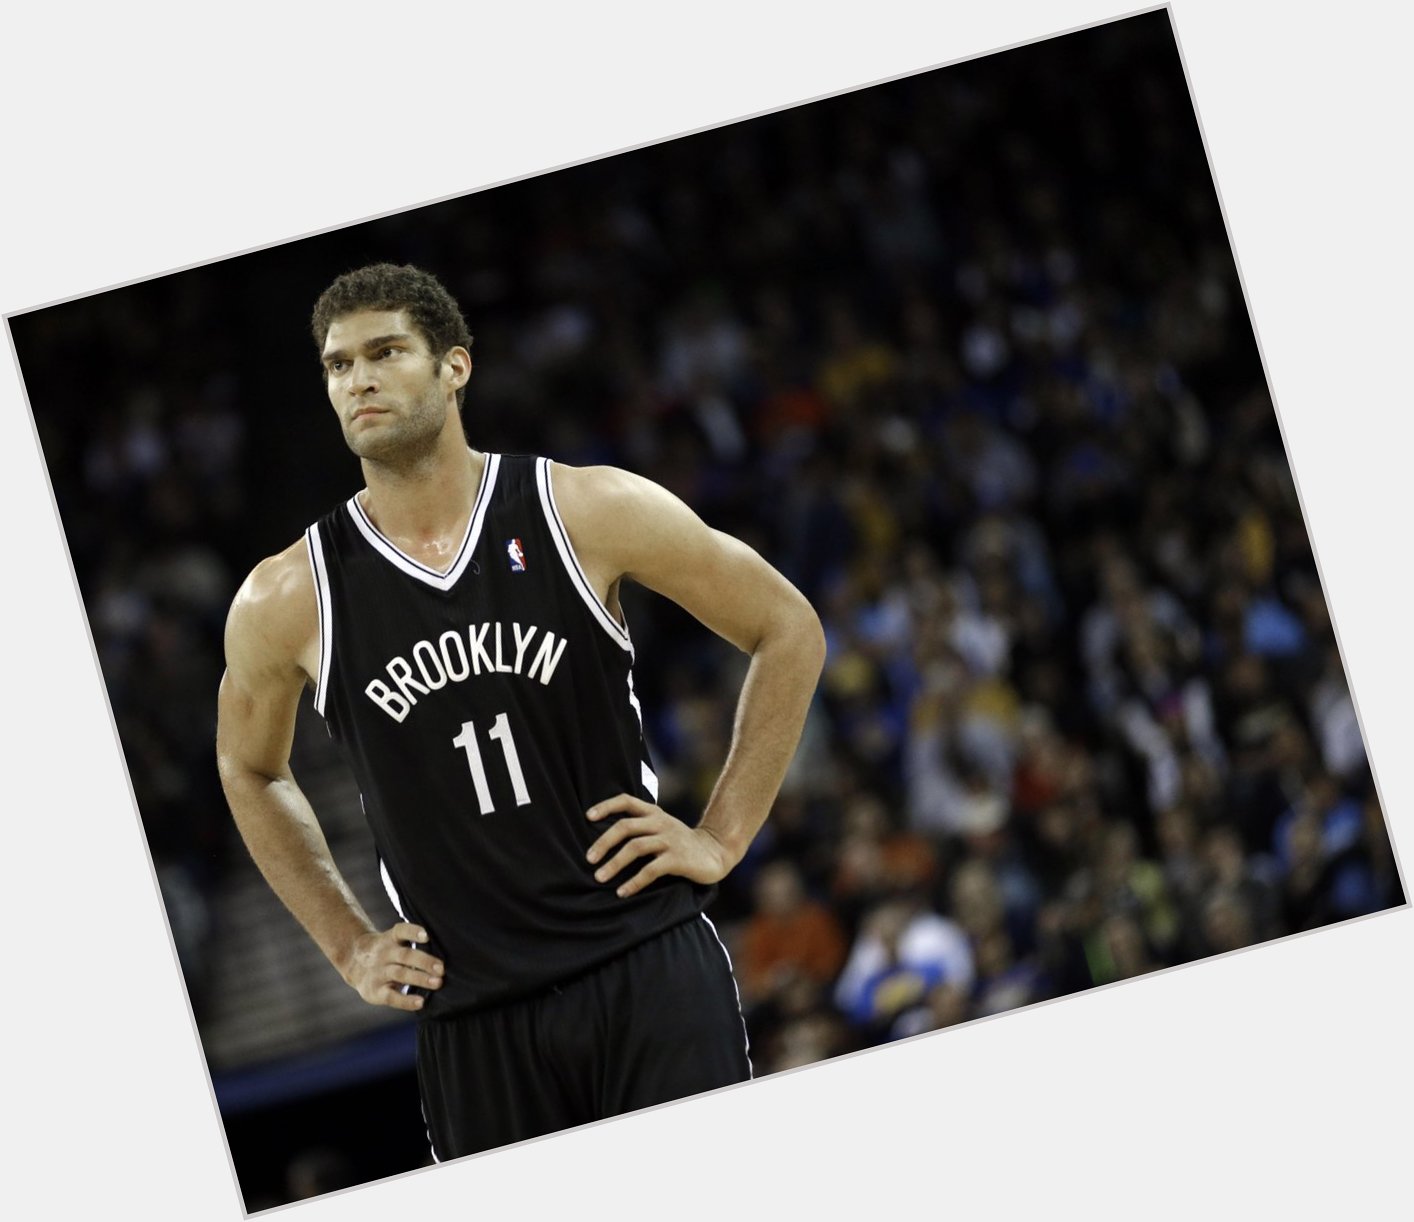 Happy Birthday to Brook Lopez, who turns 27 today! 